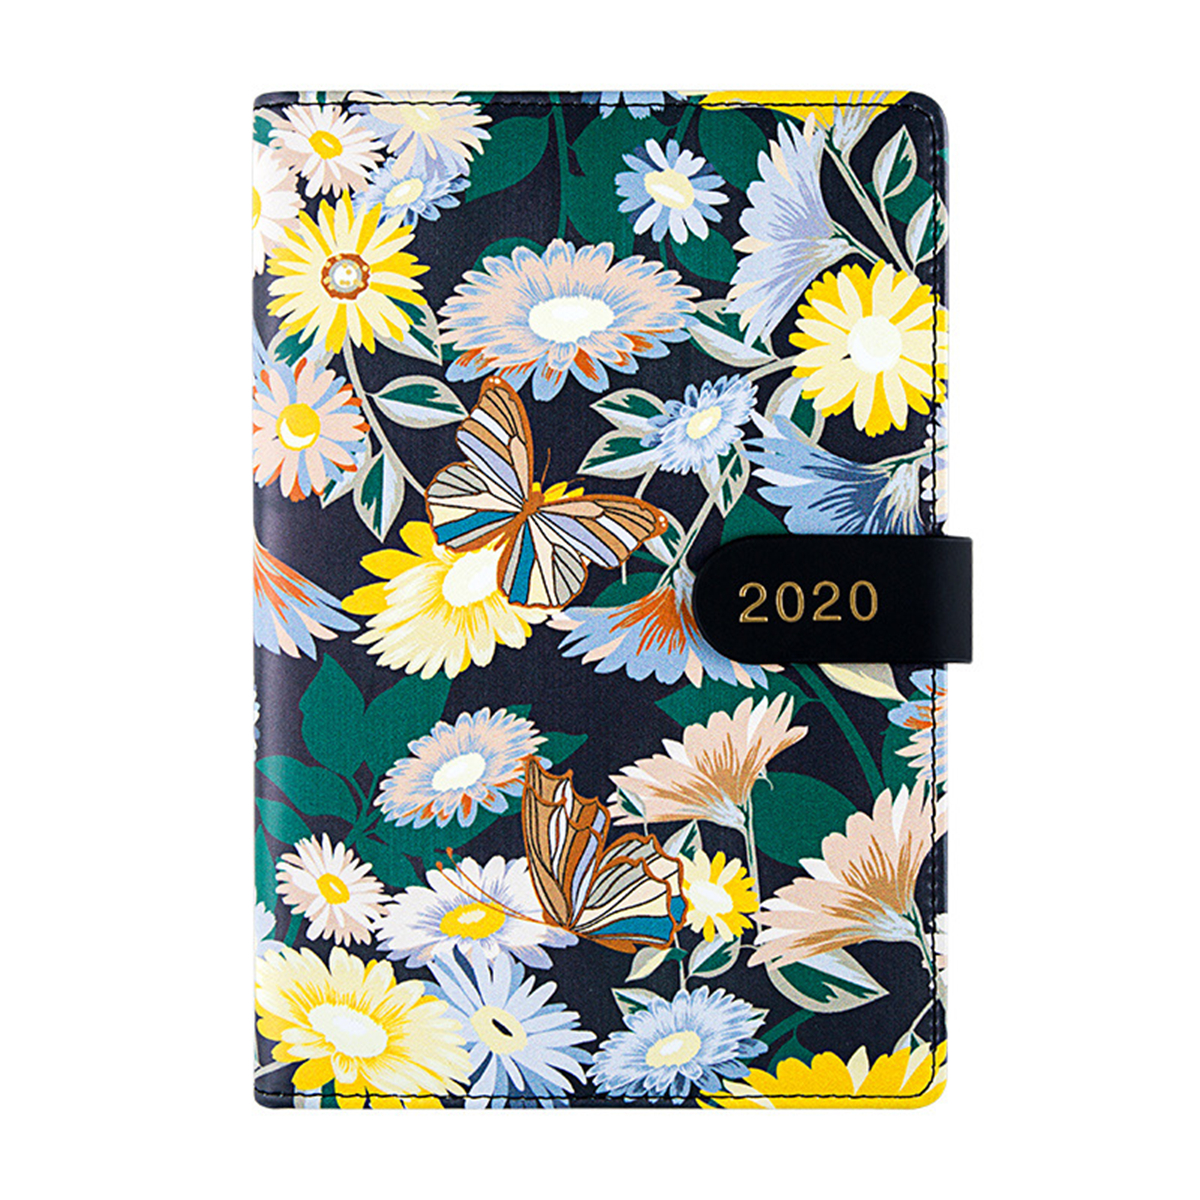 A5-2020-Theme-Notebook-Weekly-Monthly-Journal-Planner-Diary-Scheduler-Study-Business-Notebook-With-S-1747509-8